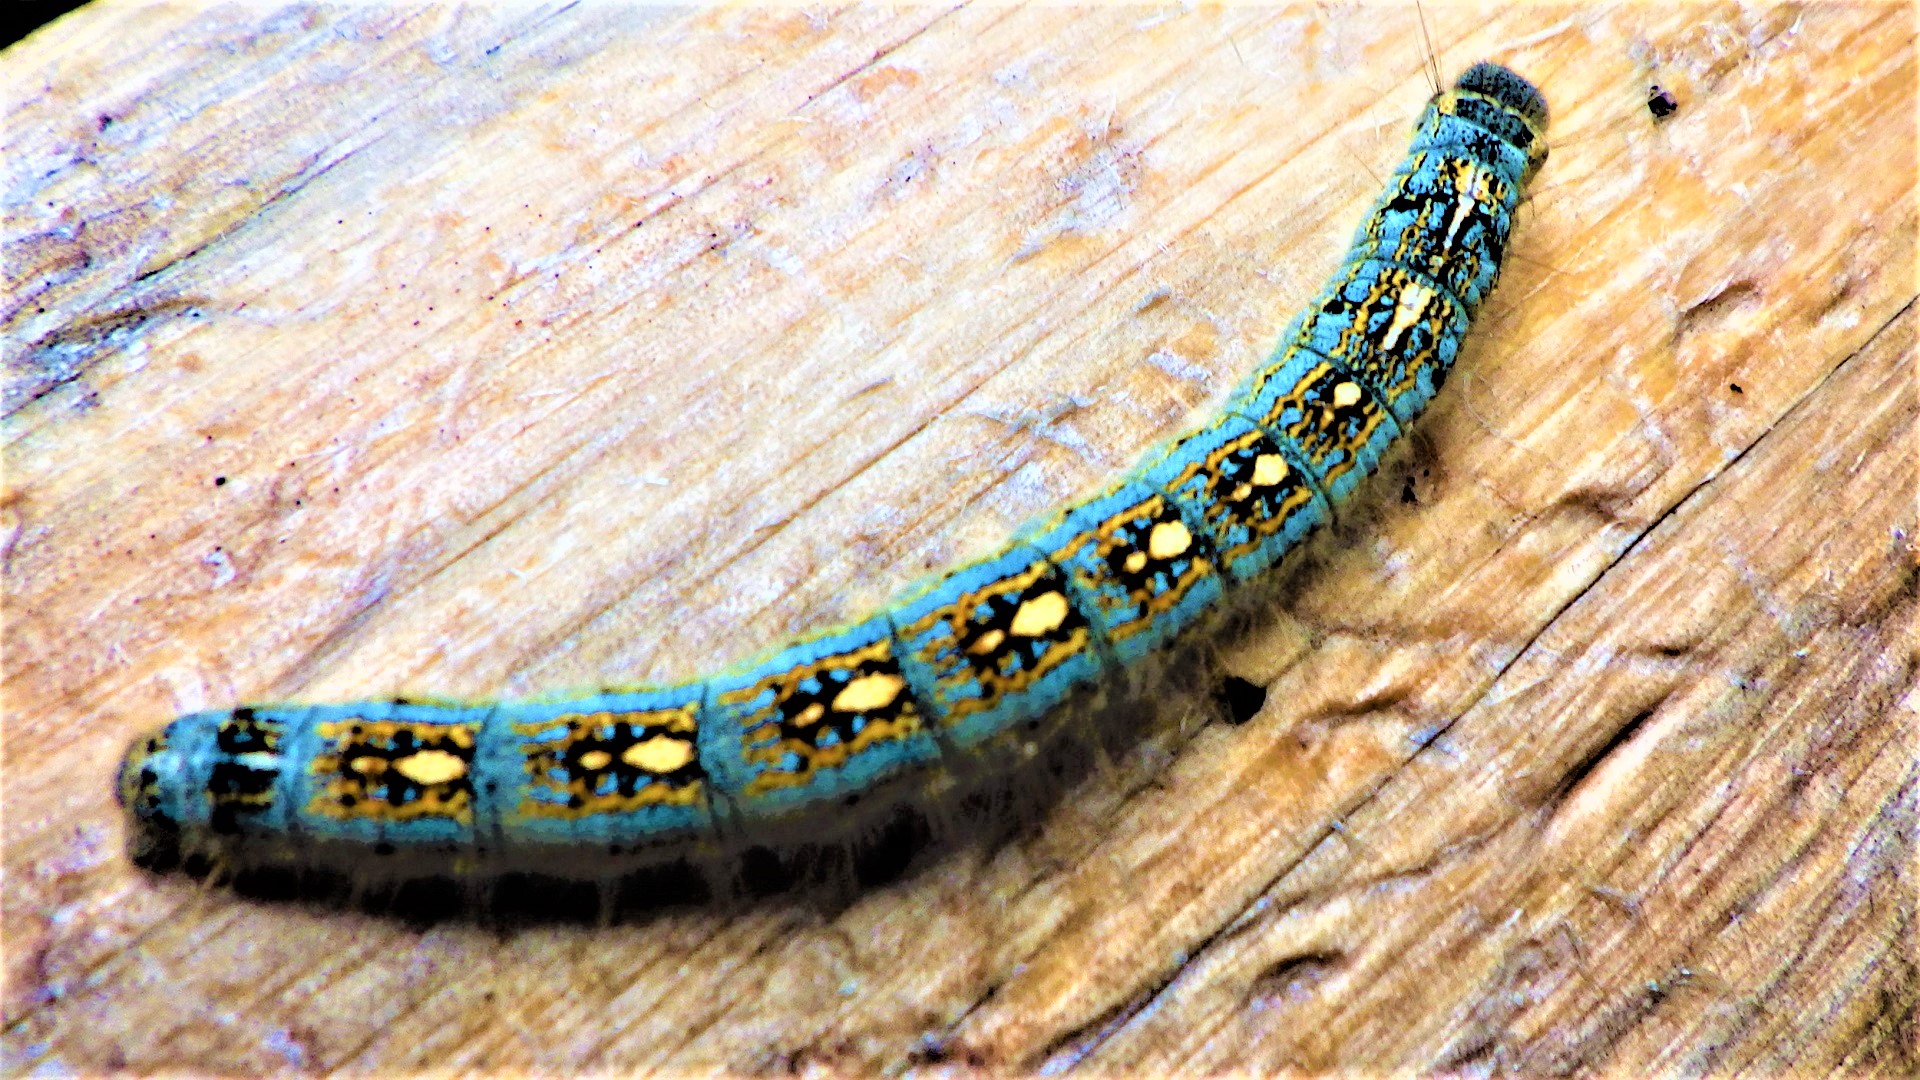 A bright blue caterpillar with yellow spots